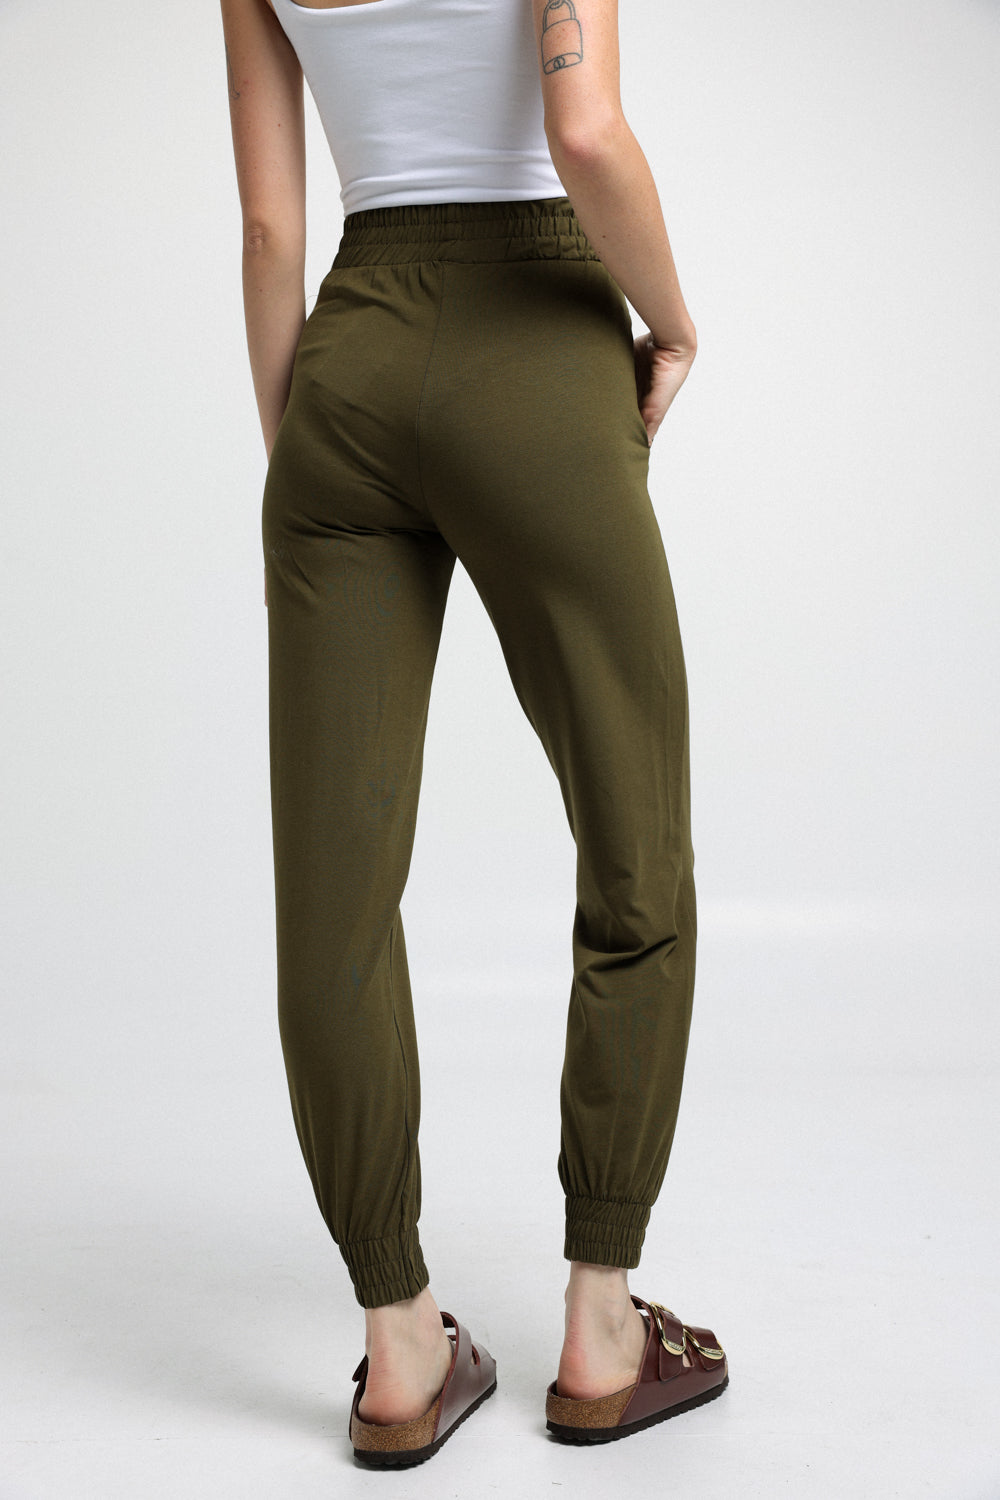 Best Olive Green Joggers